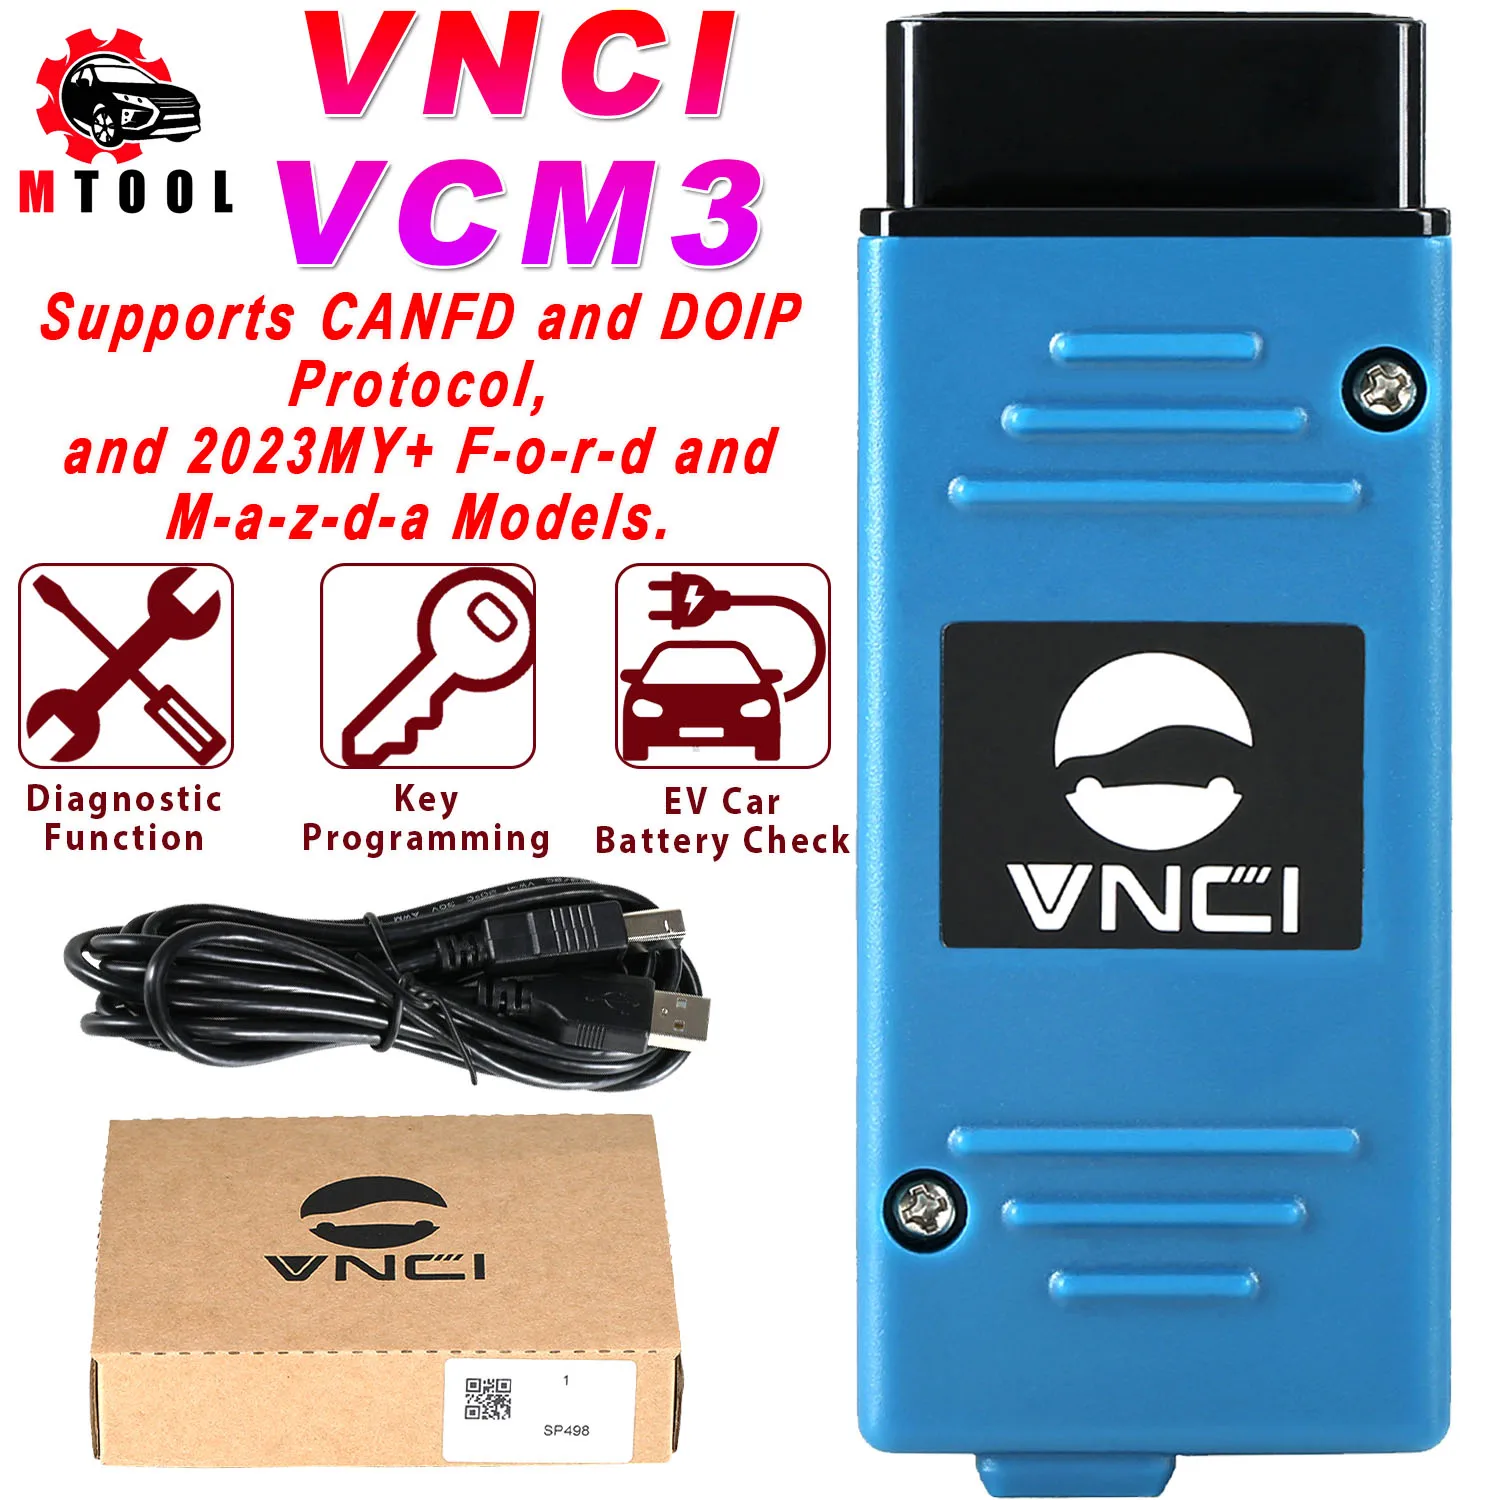 

VNCI VCM3 Car Diagnostic Scanner Support CAN FD DOIP DIOP WIFI For Mazda for Ford MDI2 from 1996 to 2023 EV Car Battery Check